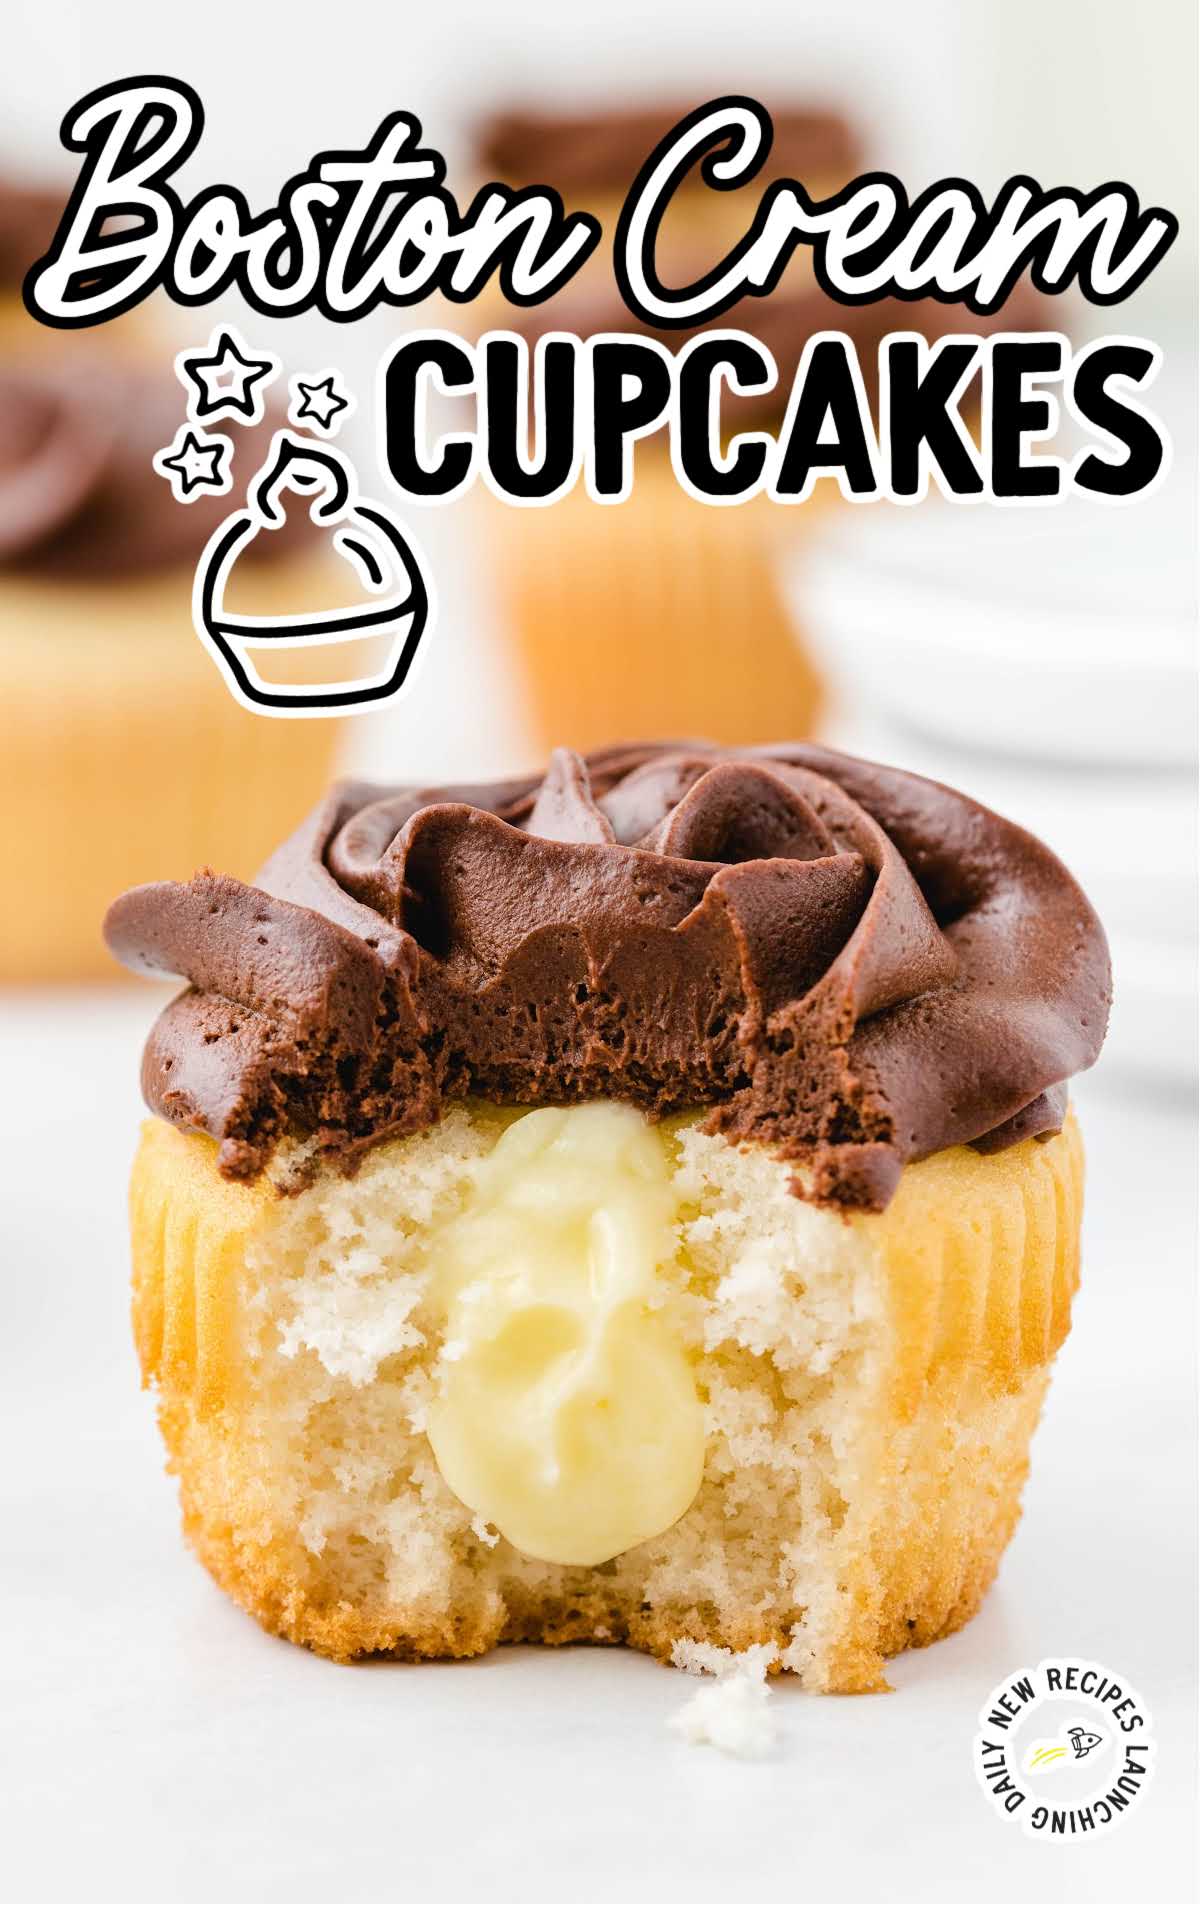 close up shot of a chocolate frosted cupcake showing it's inside Boston Cream filling